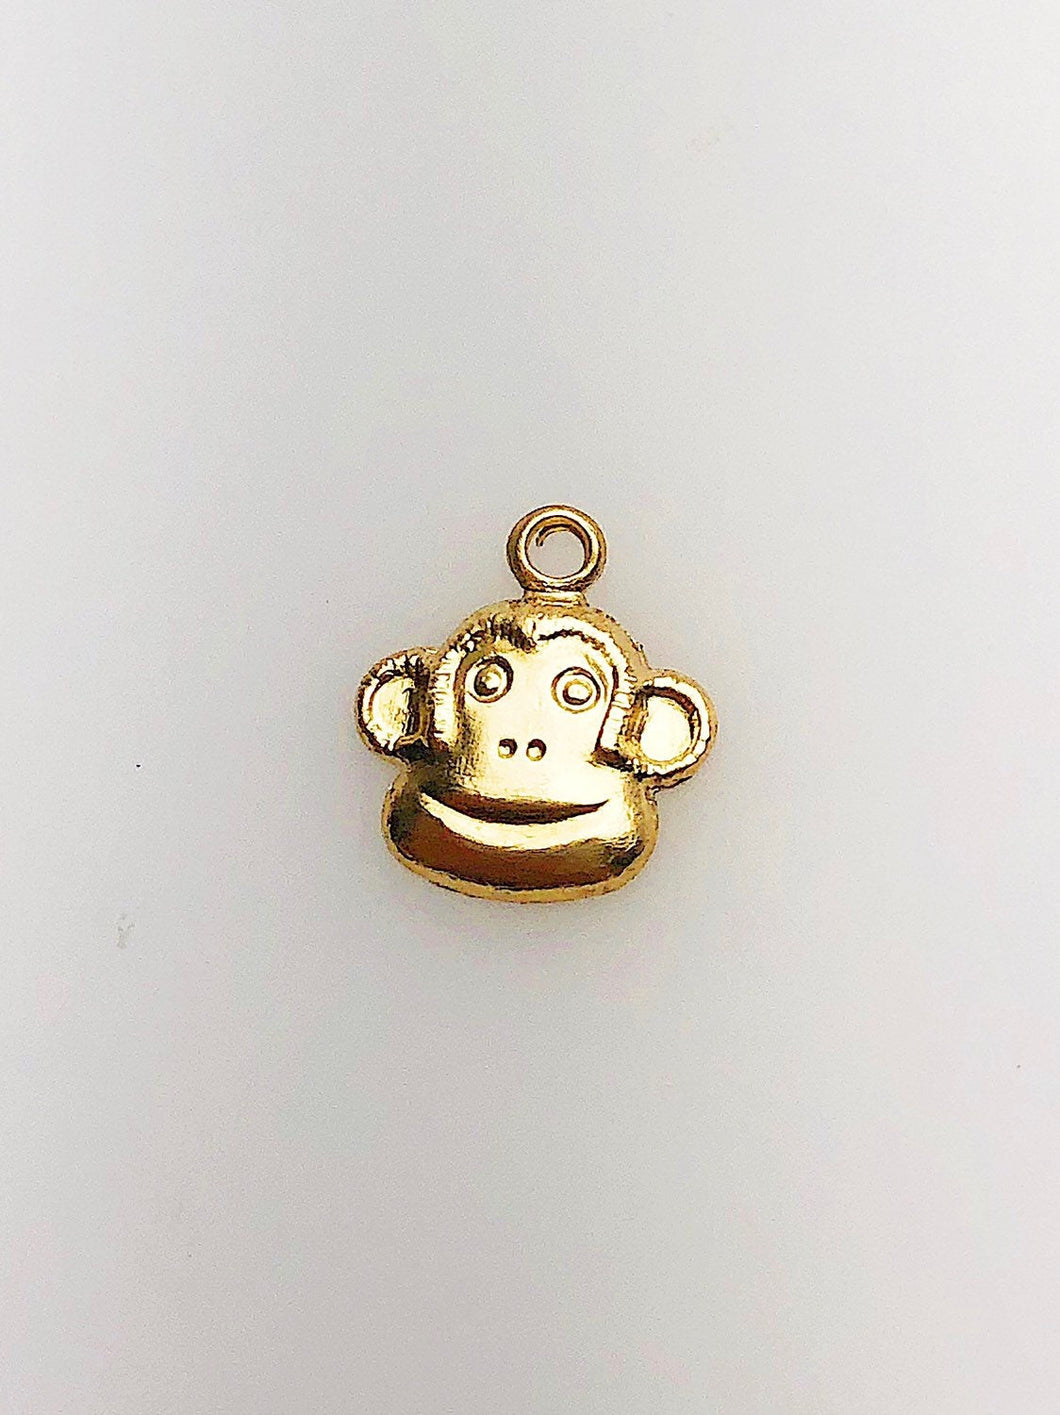 14K Gold Fill Monkey Charm w/ Ring, 9.0mm, Made in USA - 2344